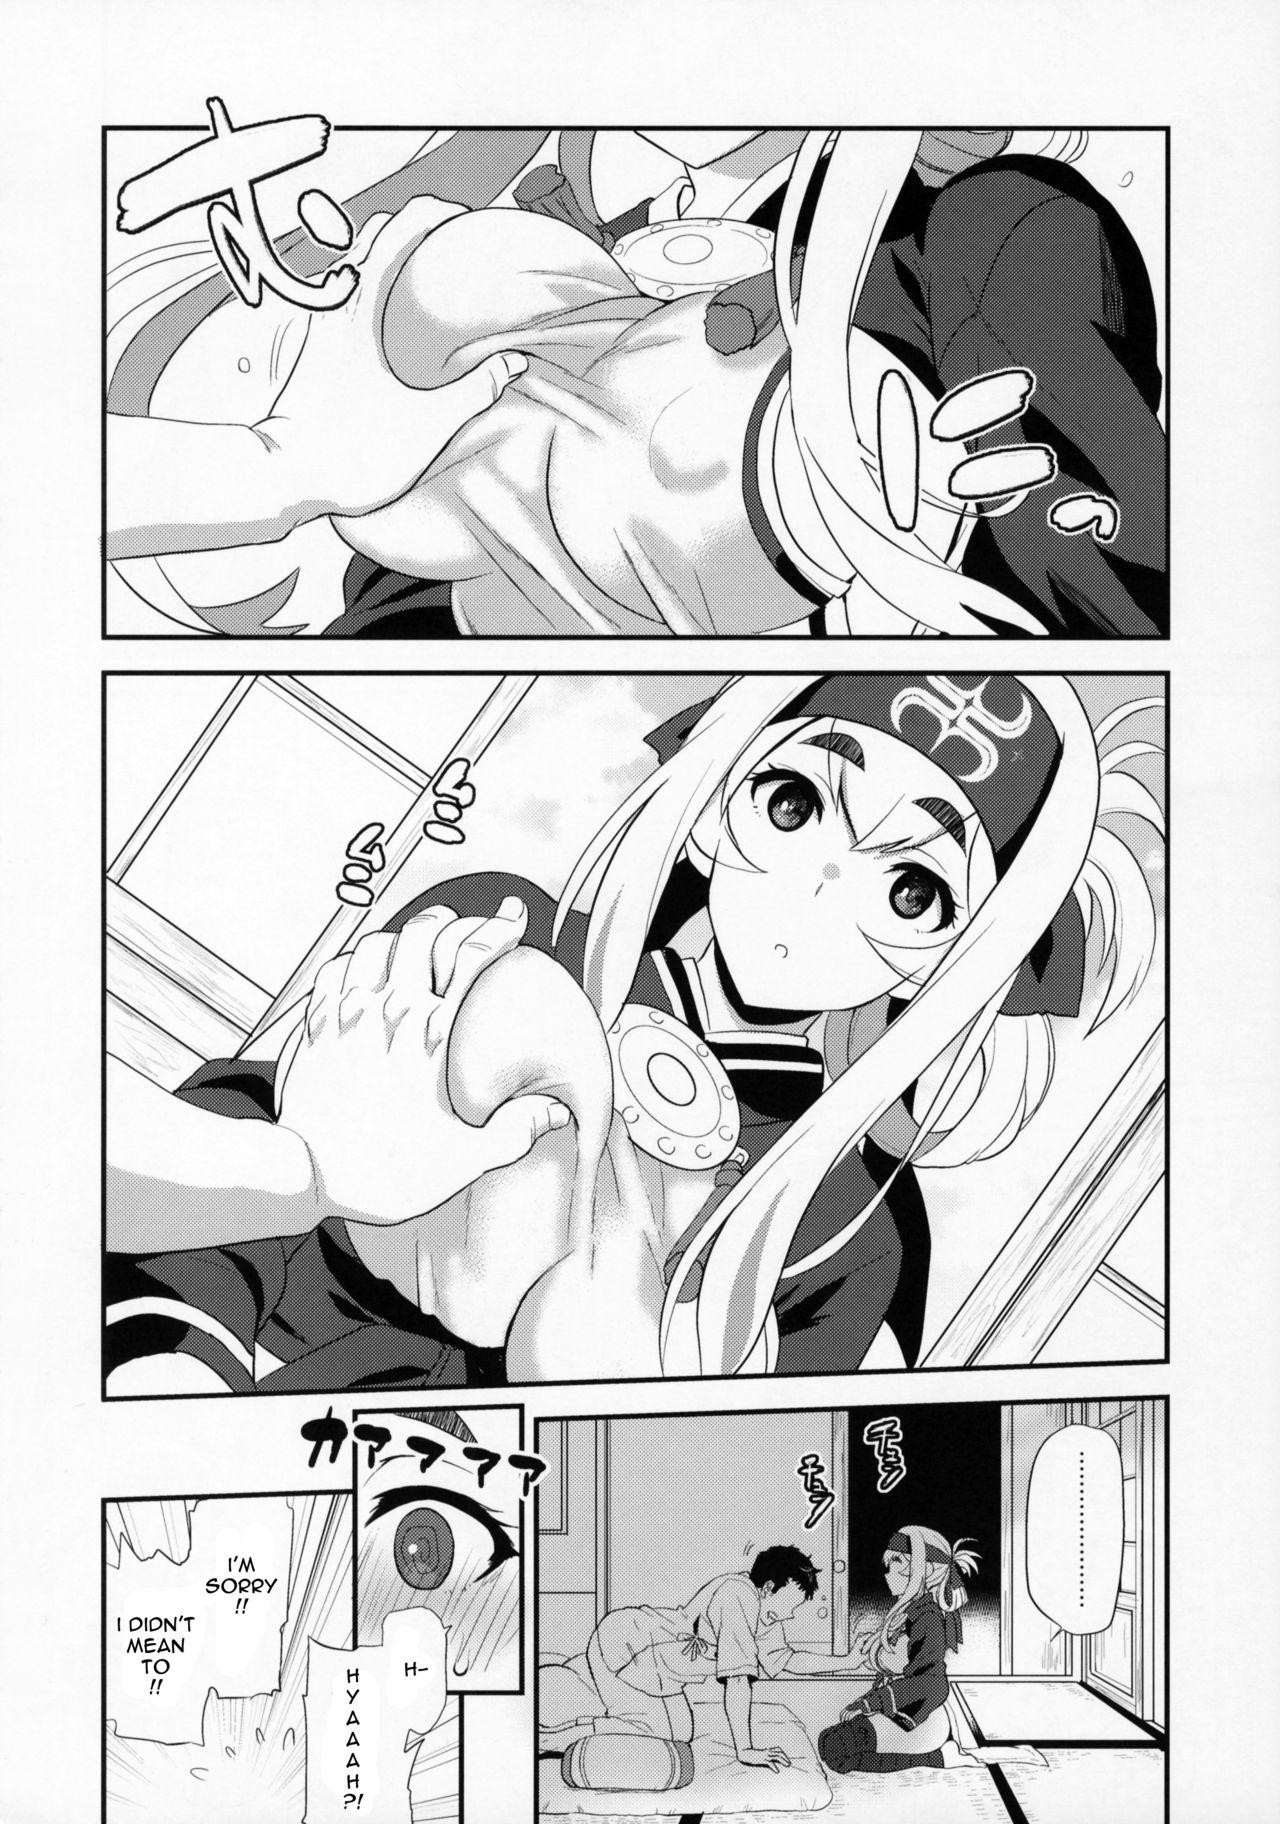 Sesso Hascup - Kantai collection  - Page 3